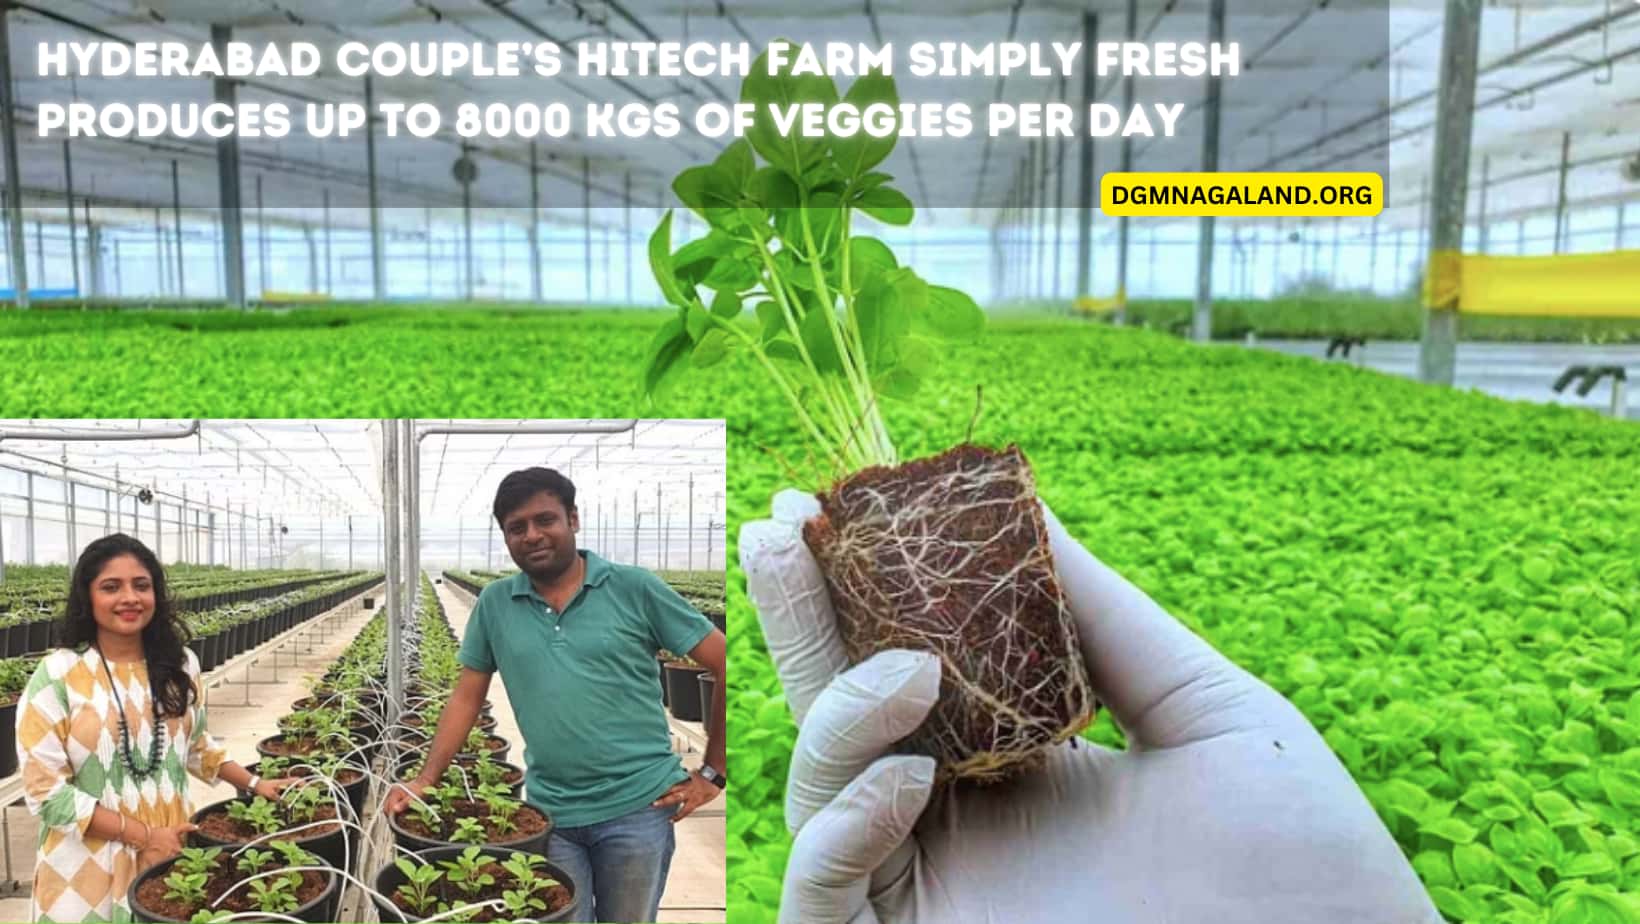 Hyderabad Couple’s HiTech Farm Simply Fresh Produces Up to 8000 Kgs of Veggies per Day